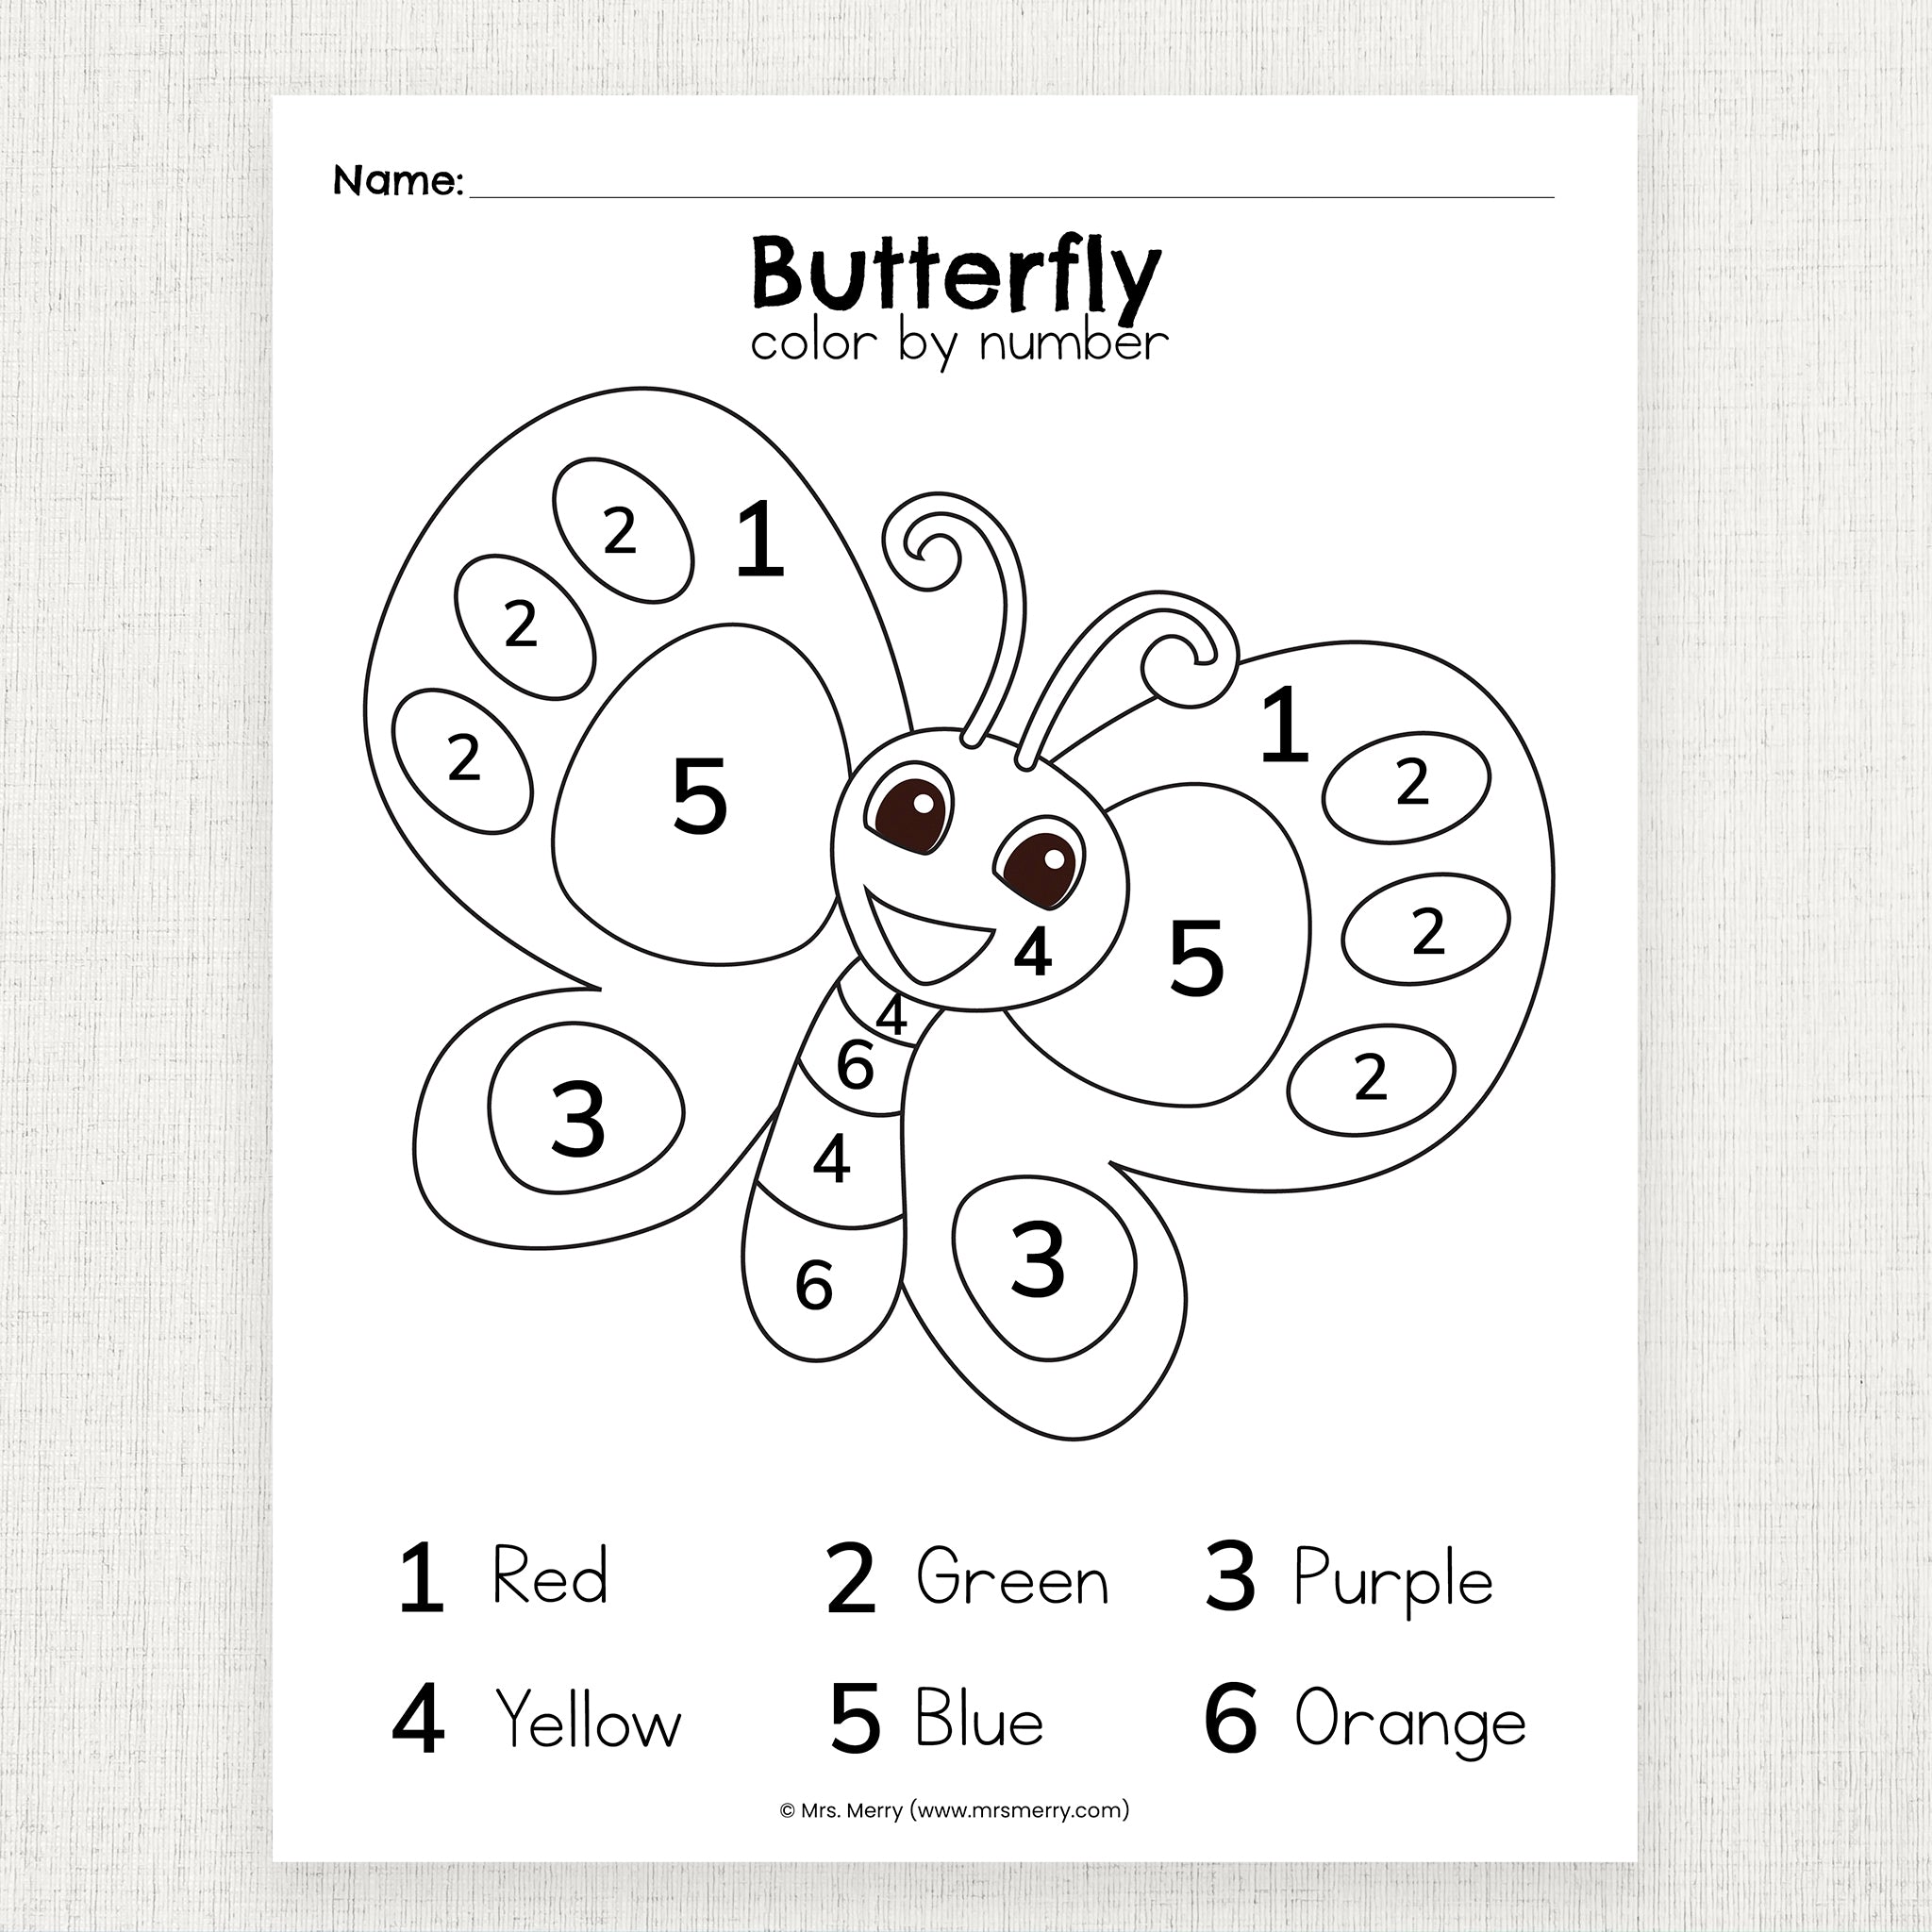 Butterfly color by number printable â mrs merry